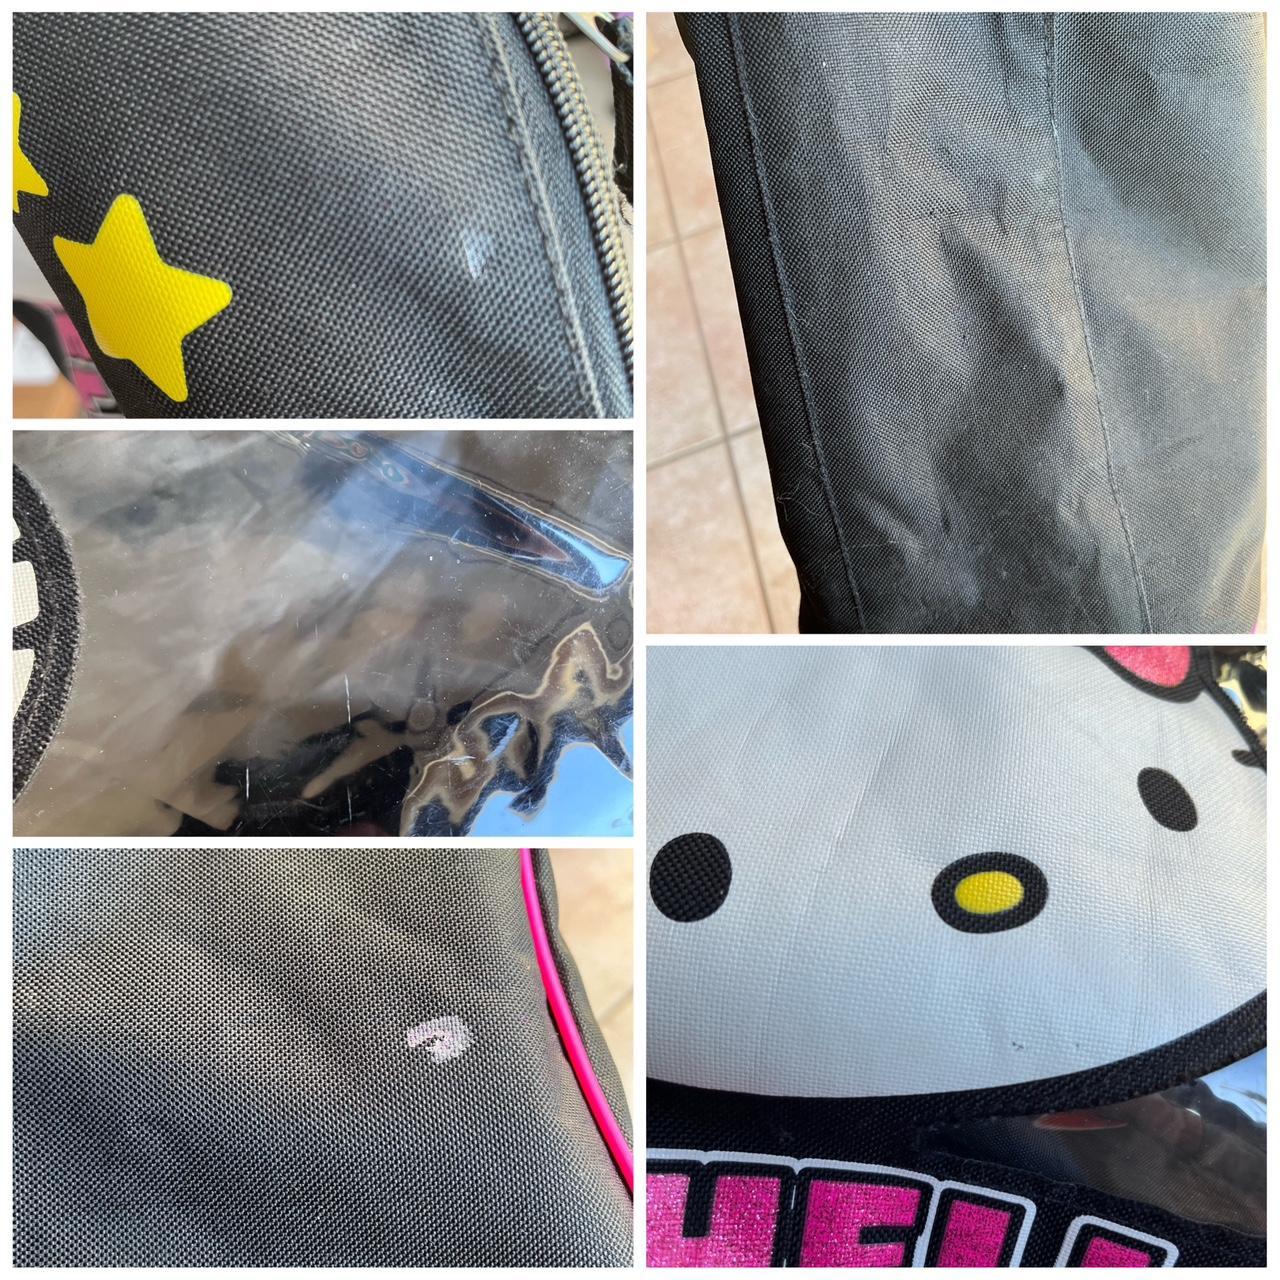 Hello kitty black and pink bag from 2014. In great - Depop